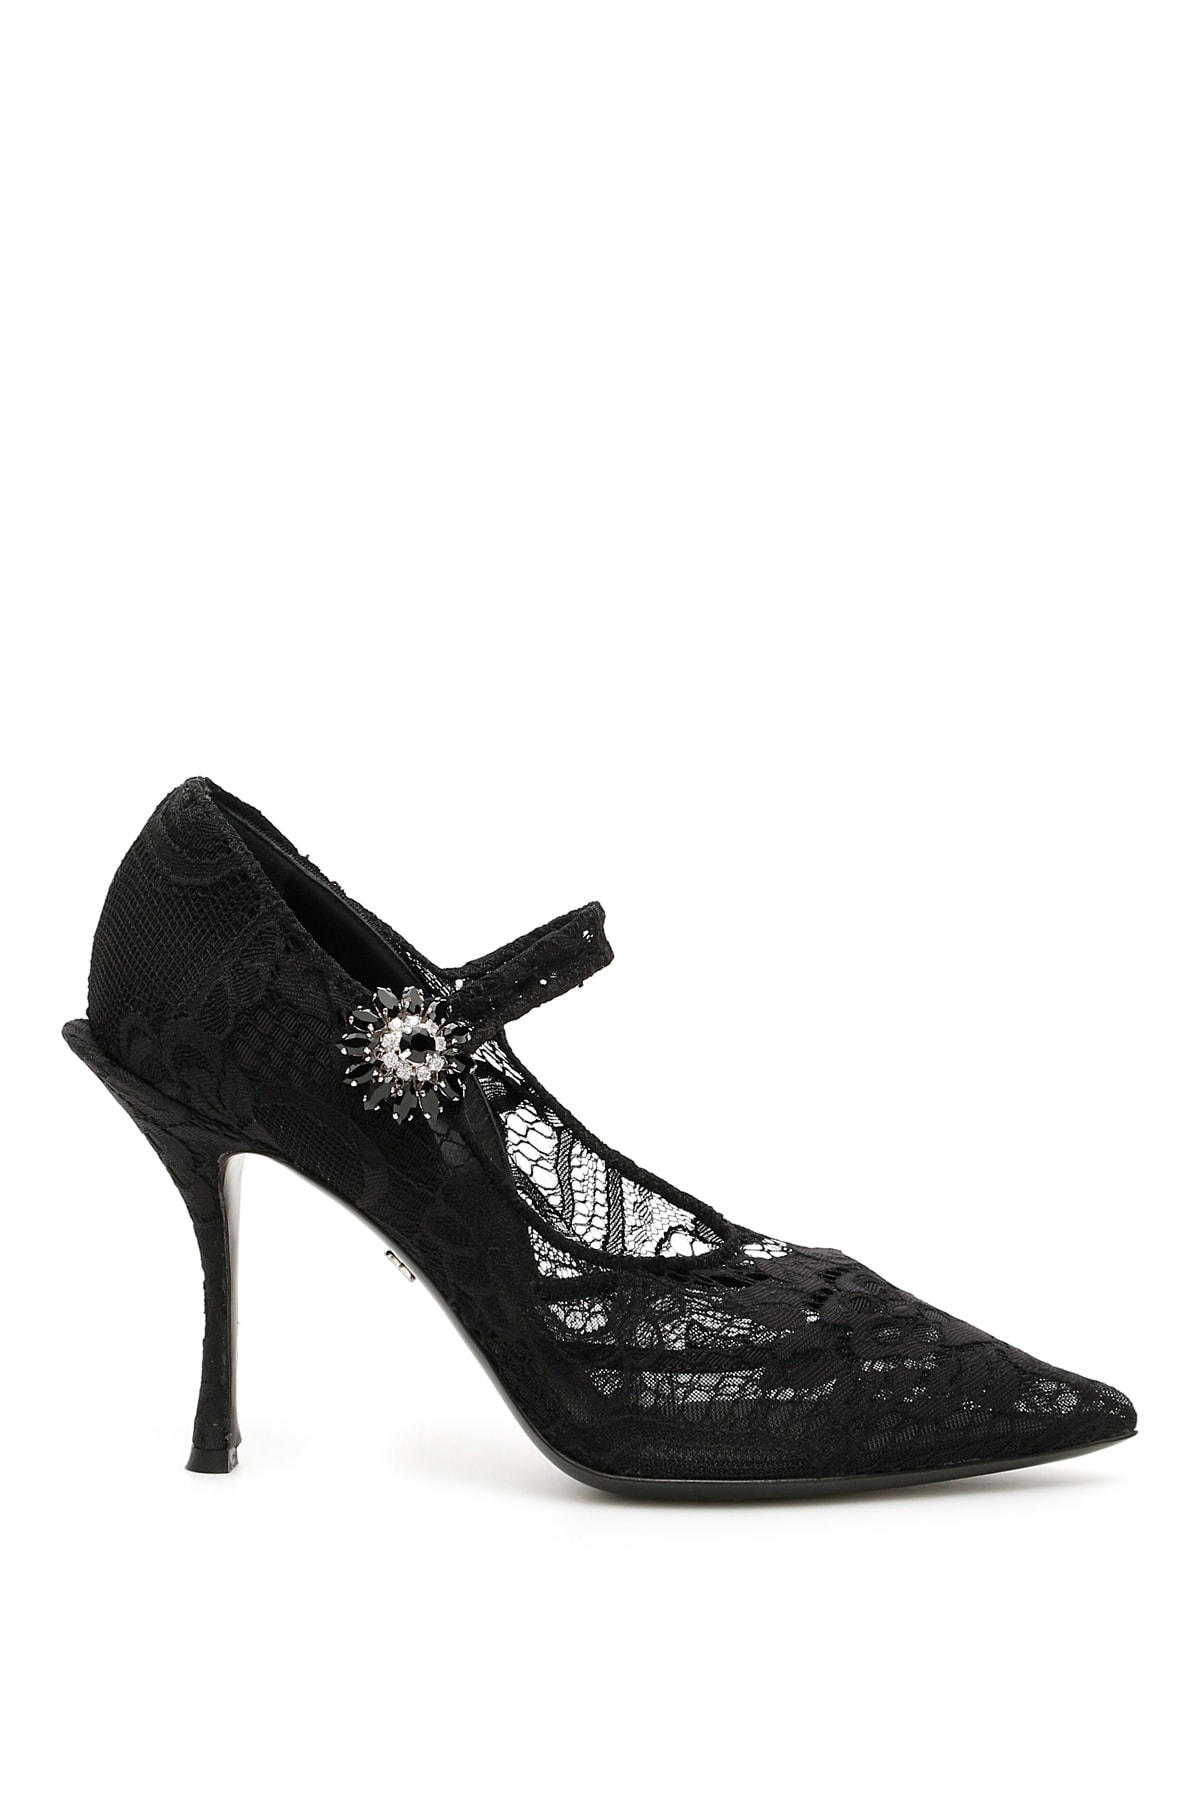 Buy Dolce & Gabbana Lace Mary Jane Pumps online, shop Dolce & Gabbana shoes with free shipping